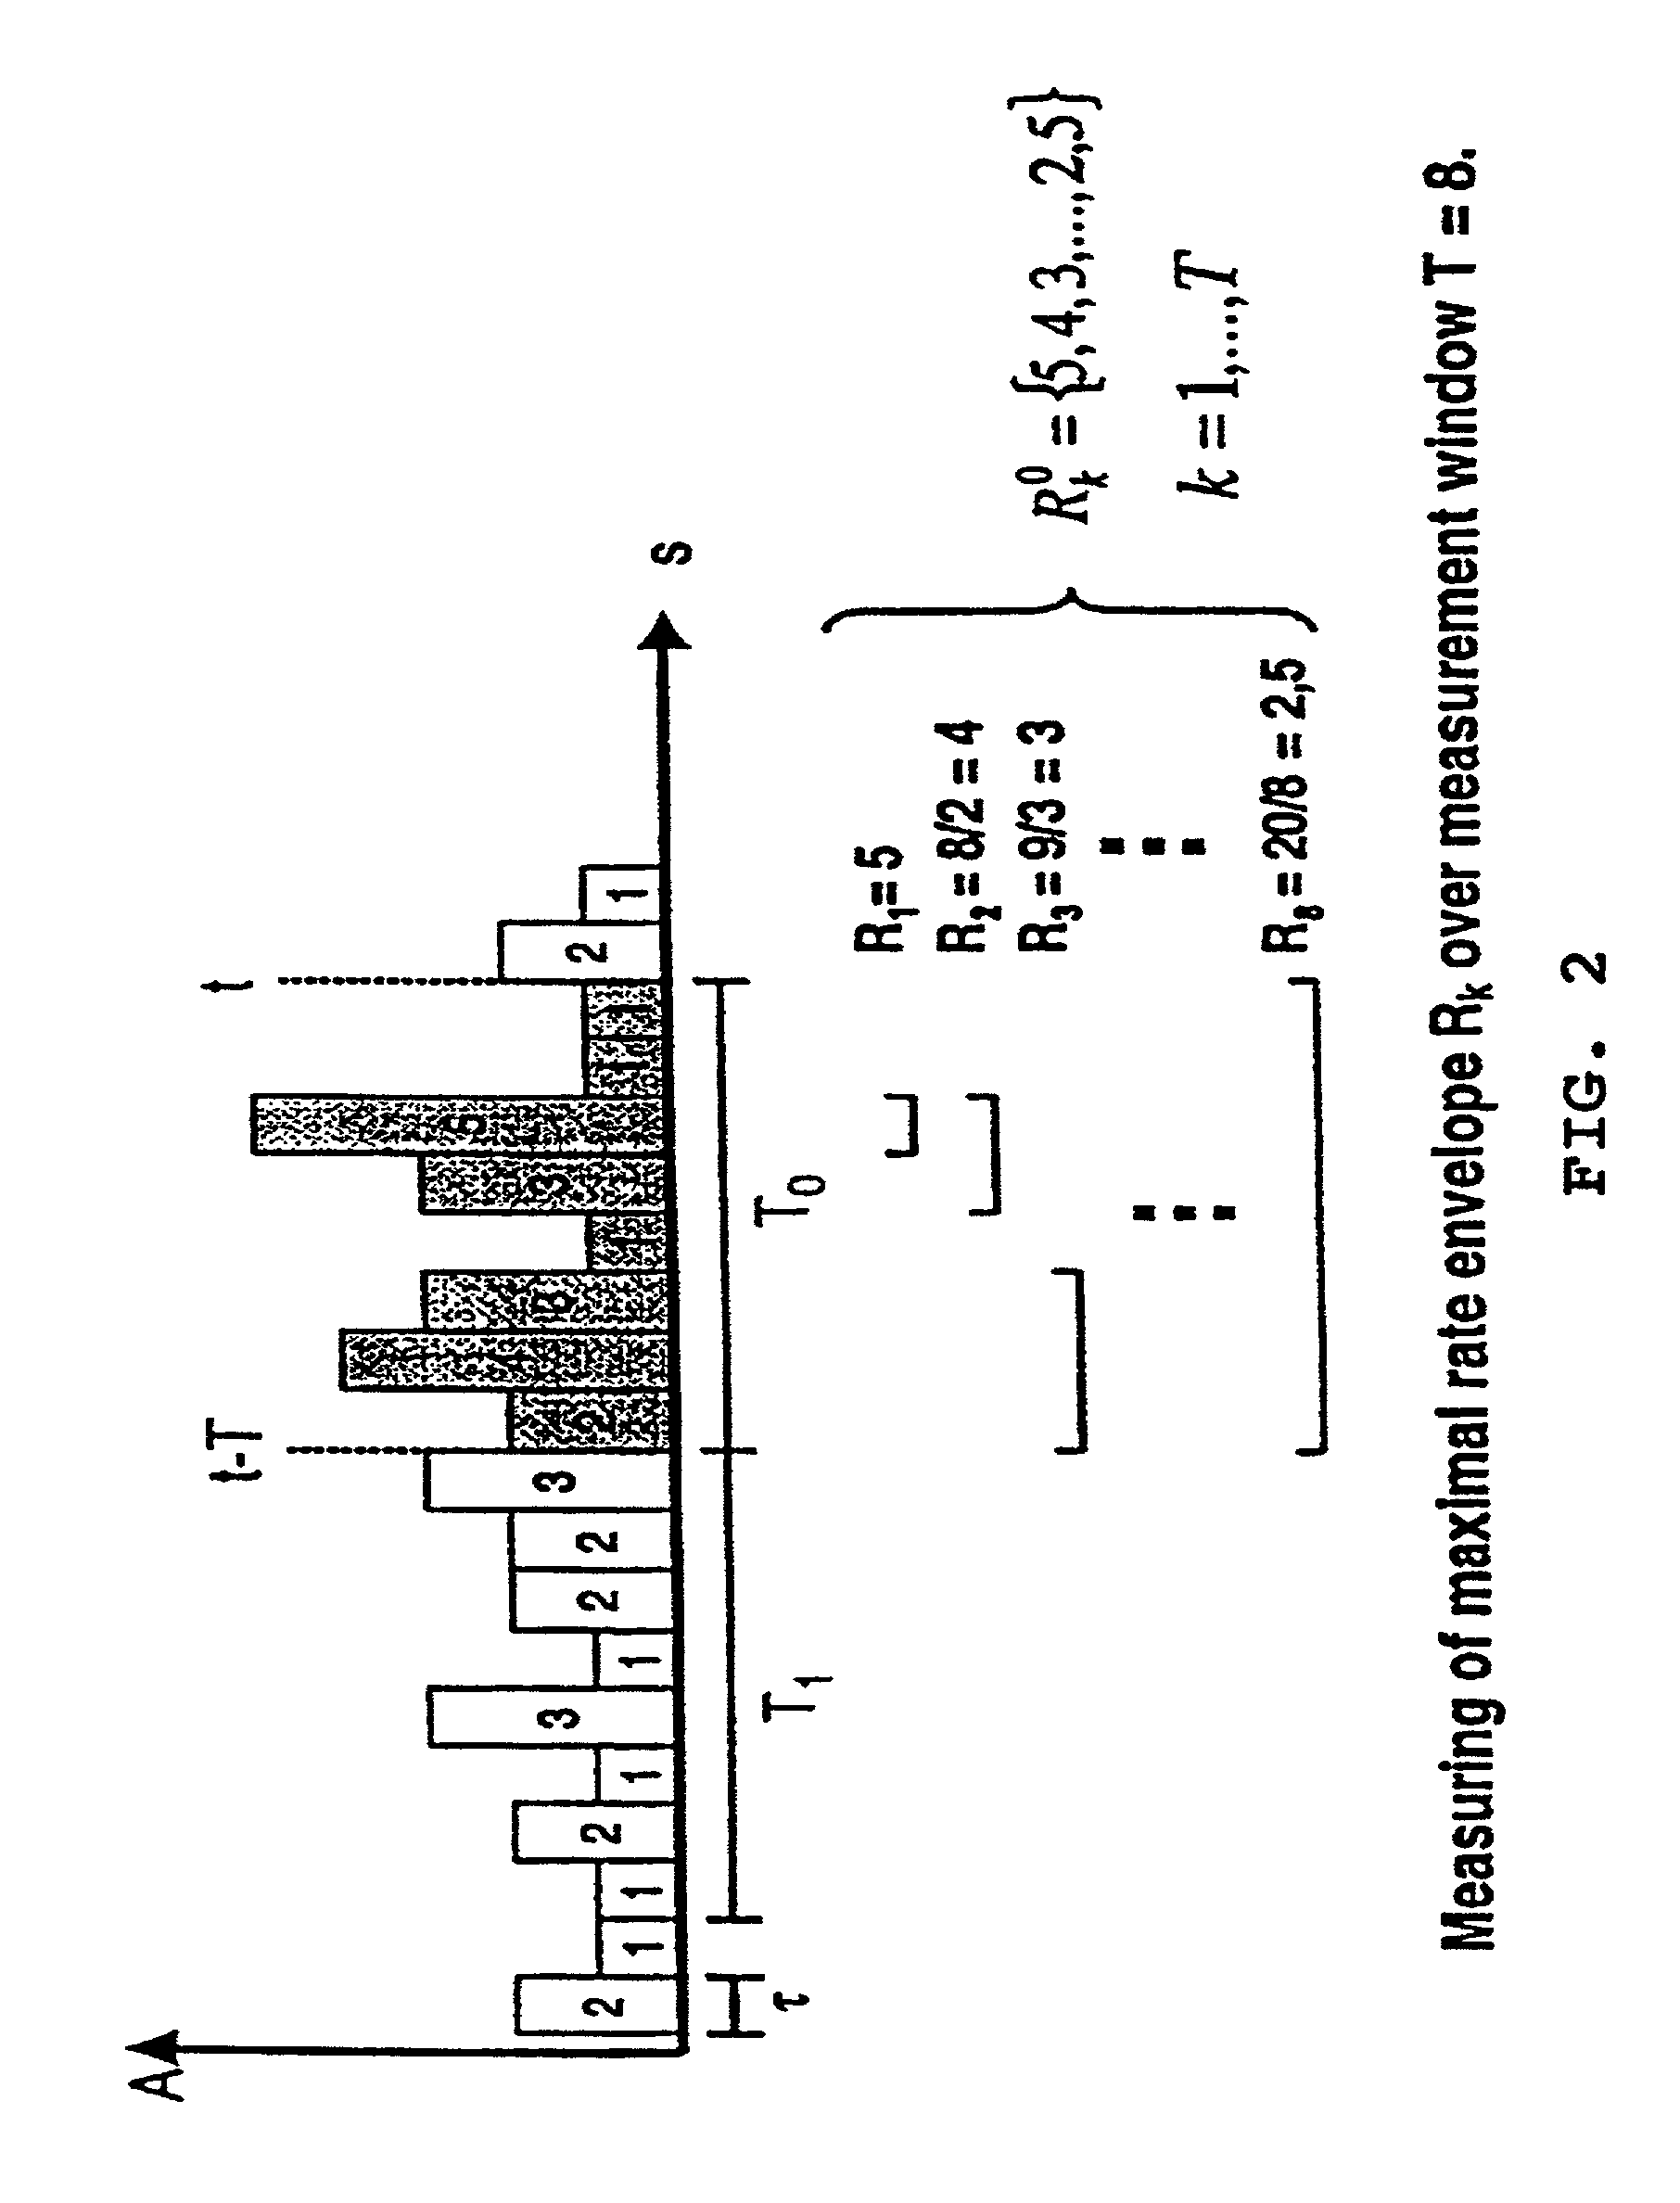 Measurement-based connection admission control (MBAC) device for a packet data network